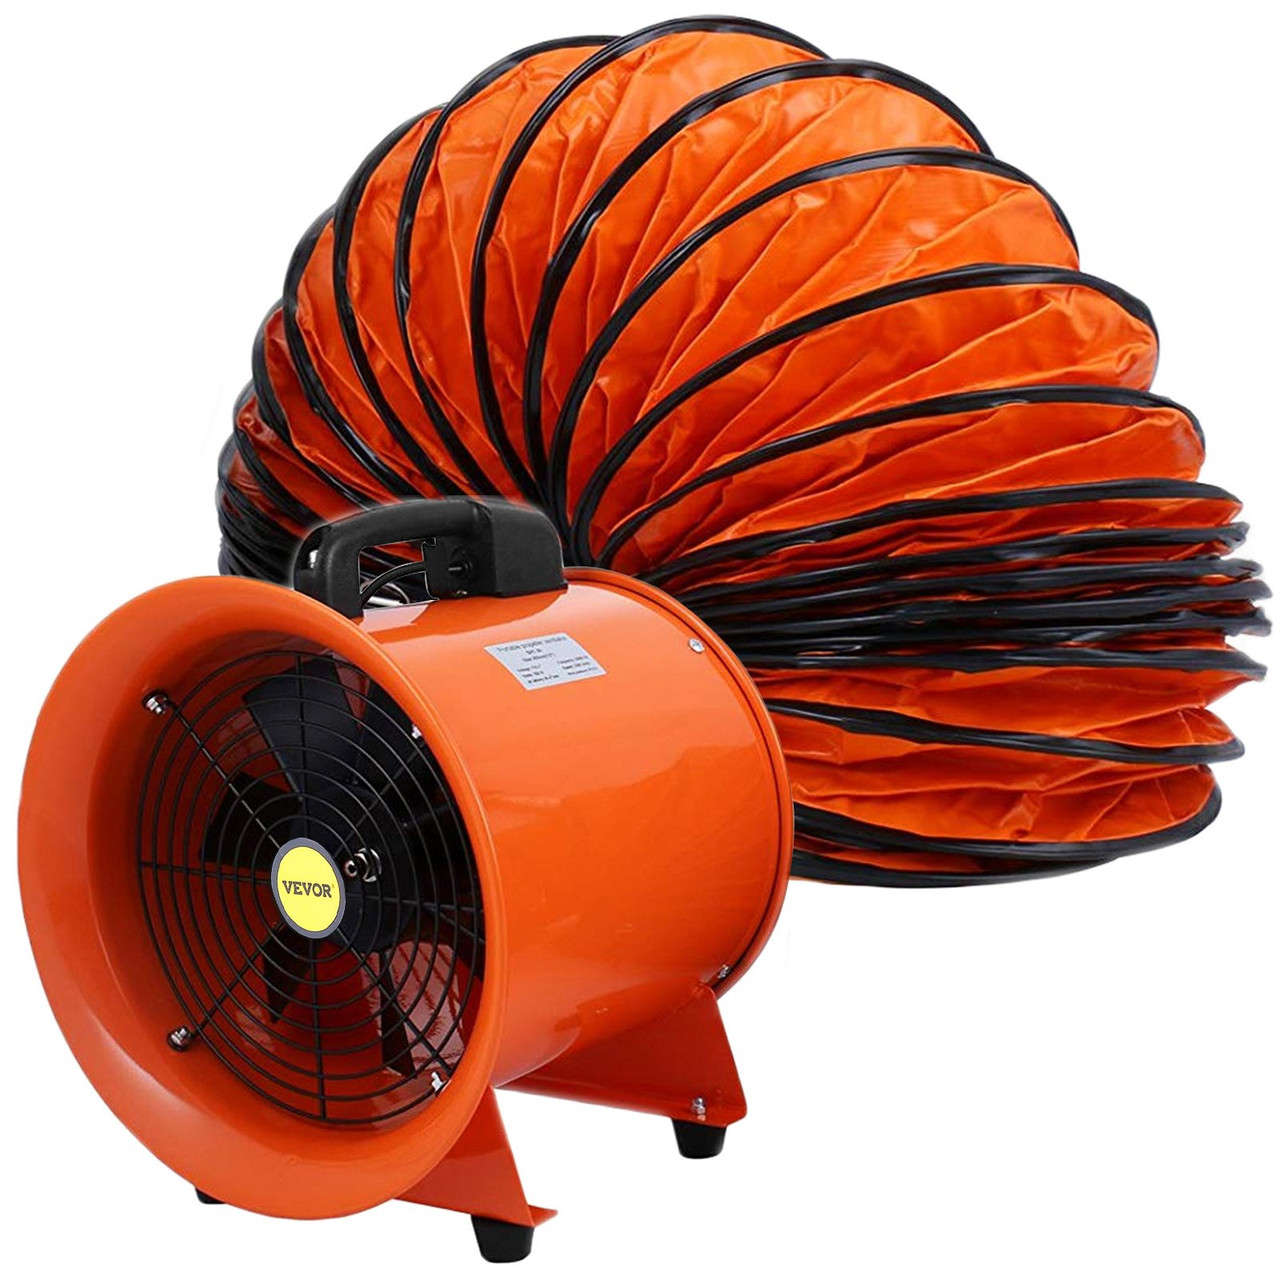 Utility Blower Fan, 12 Inches, 520W 2295 CFM High Velocity Ventilator w/ 16 ft/5 m Duct Hose, Portable Ventilation Fan, Fume Extractor for Exhausting